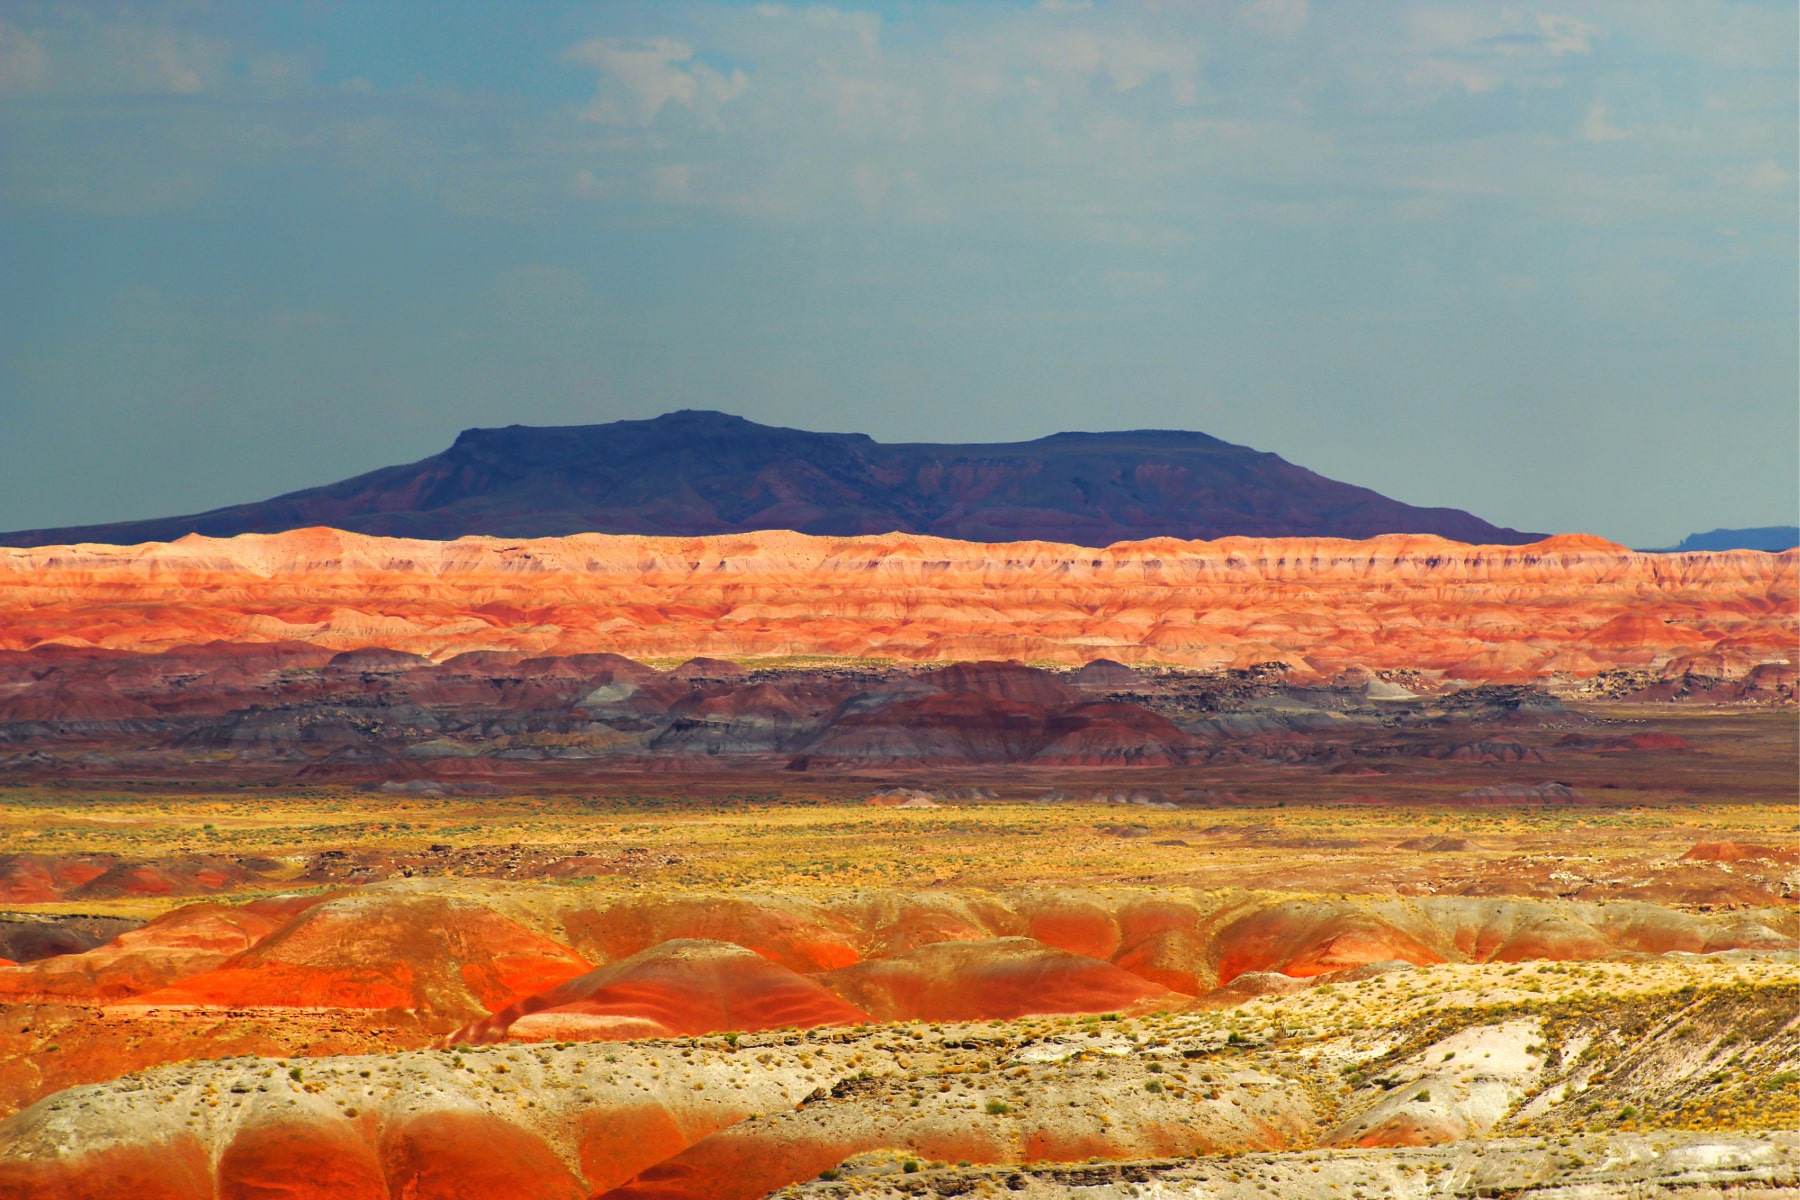 A distant view of the rock layers at Petrified Forest National Park.